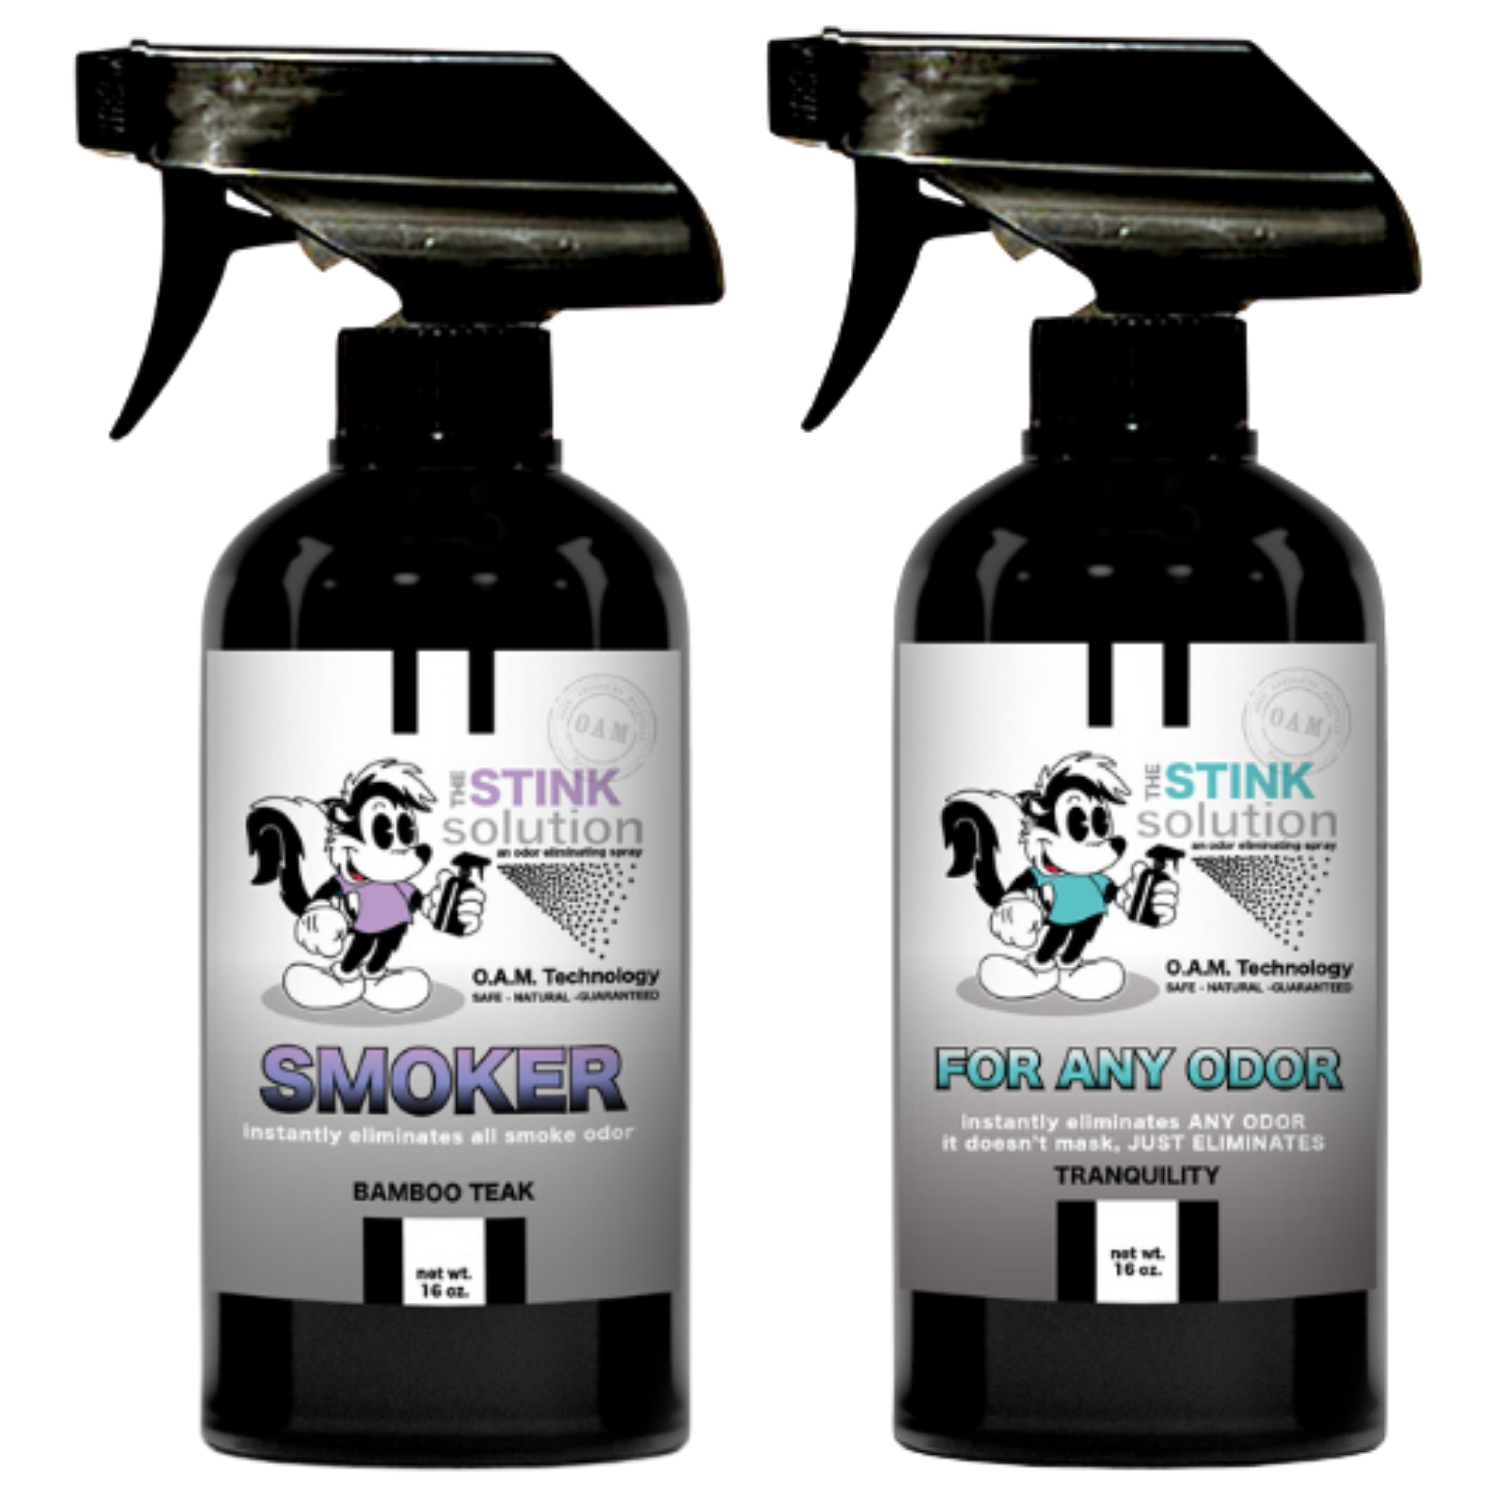 The Stink Solution One Smoker Bamboo Teak, One Tranquility 16 oz. Sprays Natural, safe, non-toxic, enzyme-free odor eliminating spray. Multi-purpose use for any odor: smoke, urine, food, sweat, and more. Safe to spray anywhere: homes, cars, furniture, bathroom, carpet, and more.